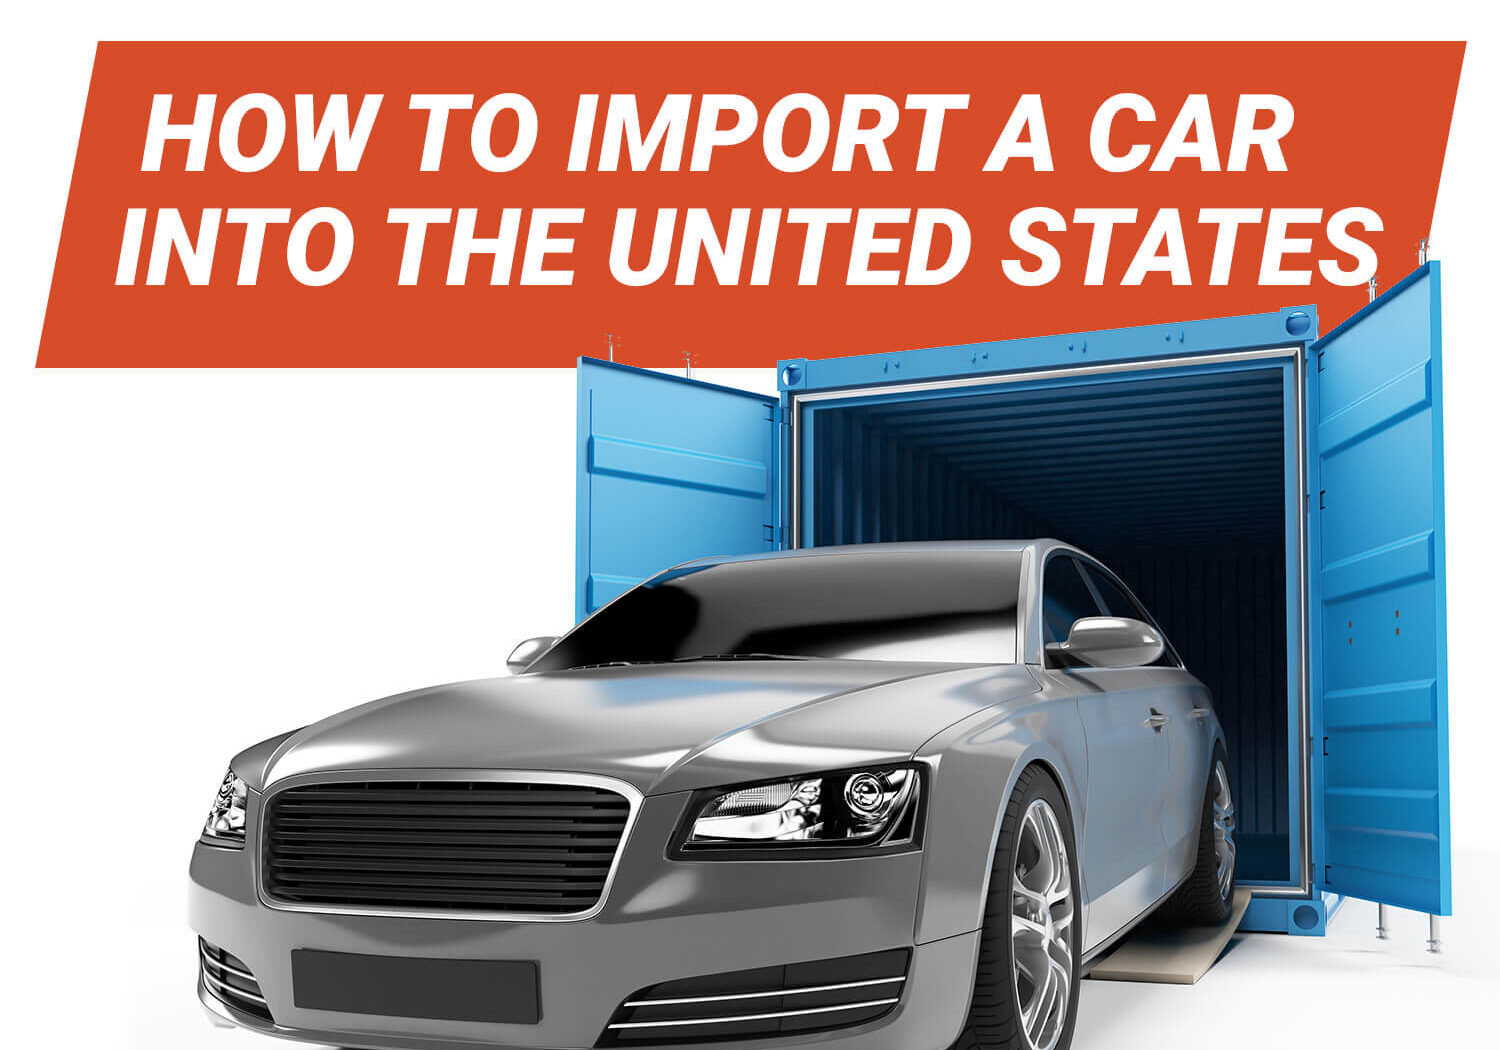 Car in coming out of shipping container. How To Import a Car into the United States